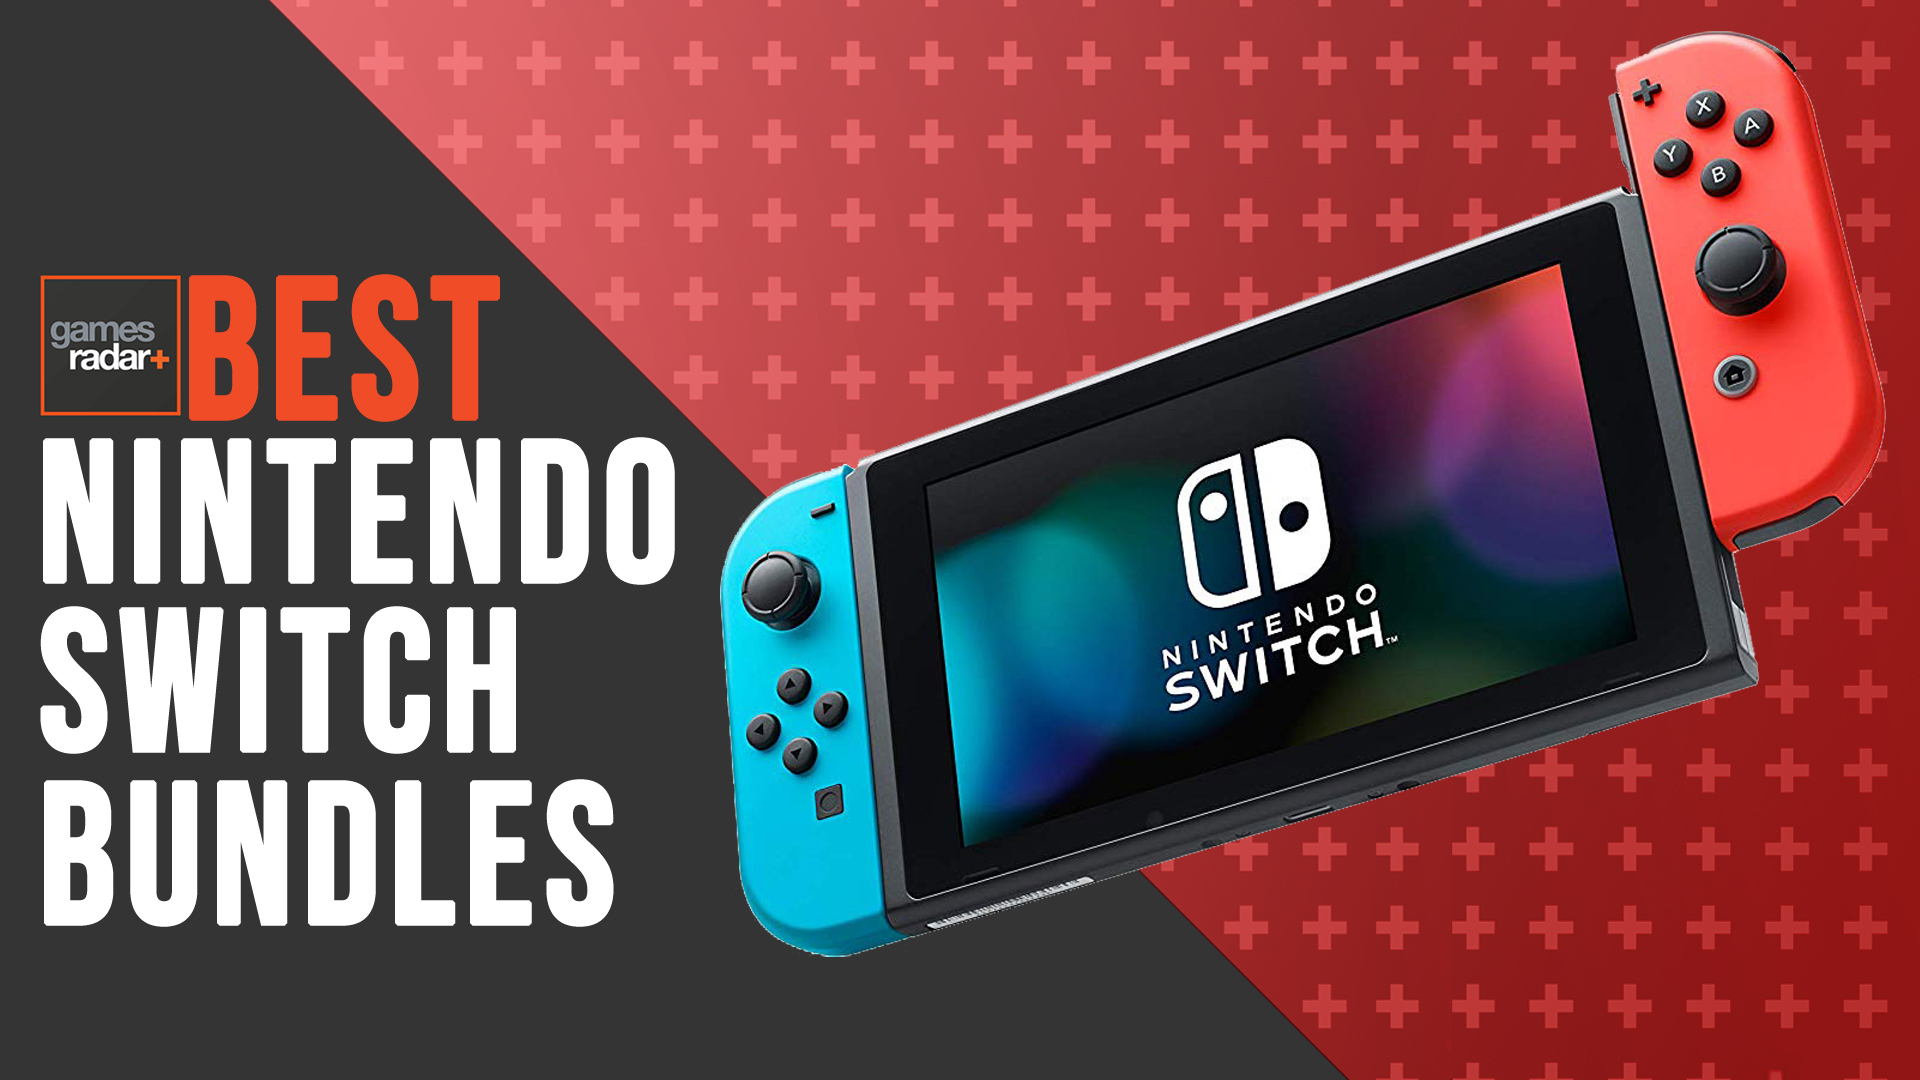 The Most Awaited Switch Games of 2019
